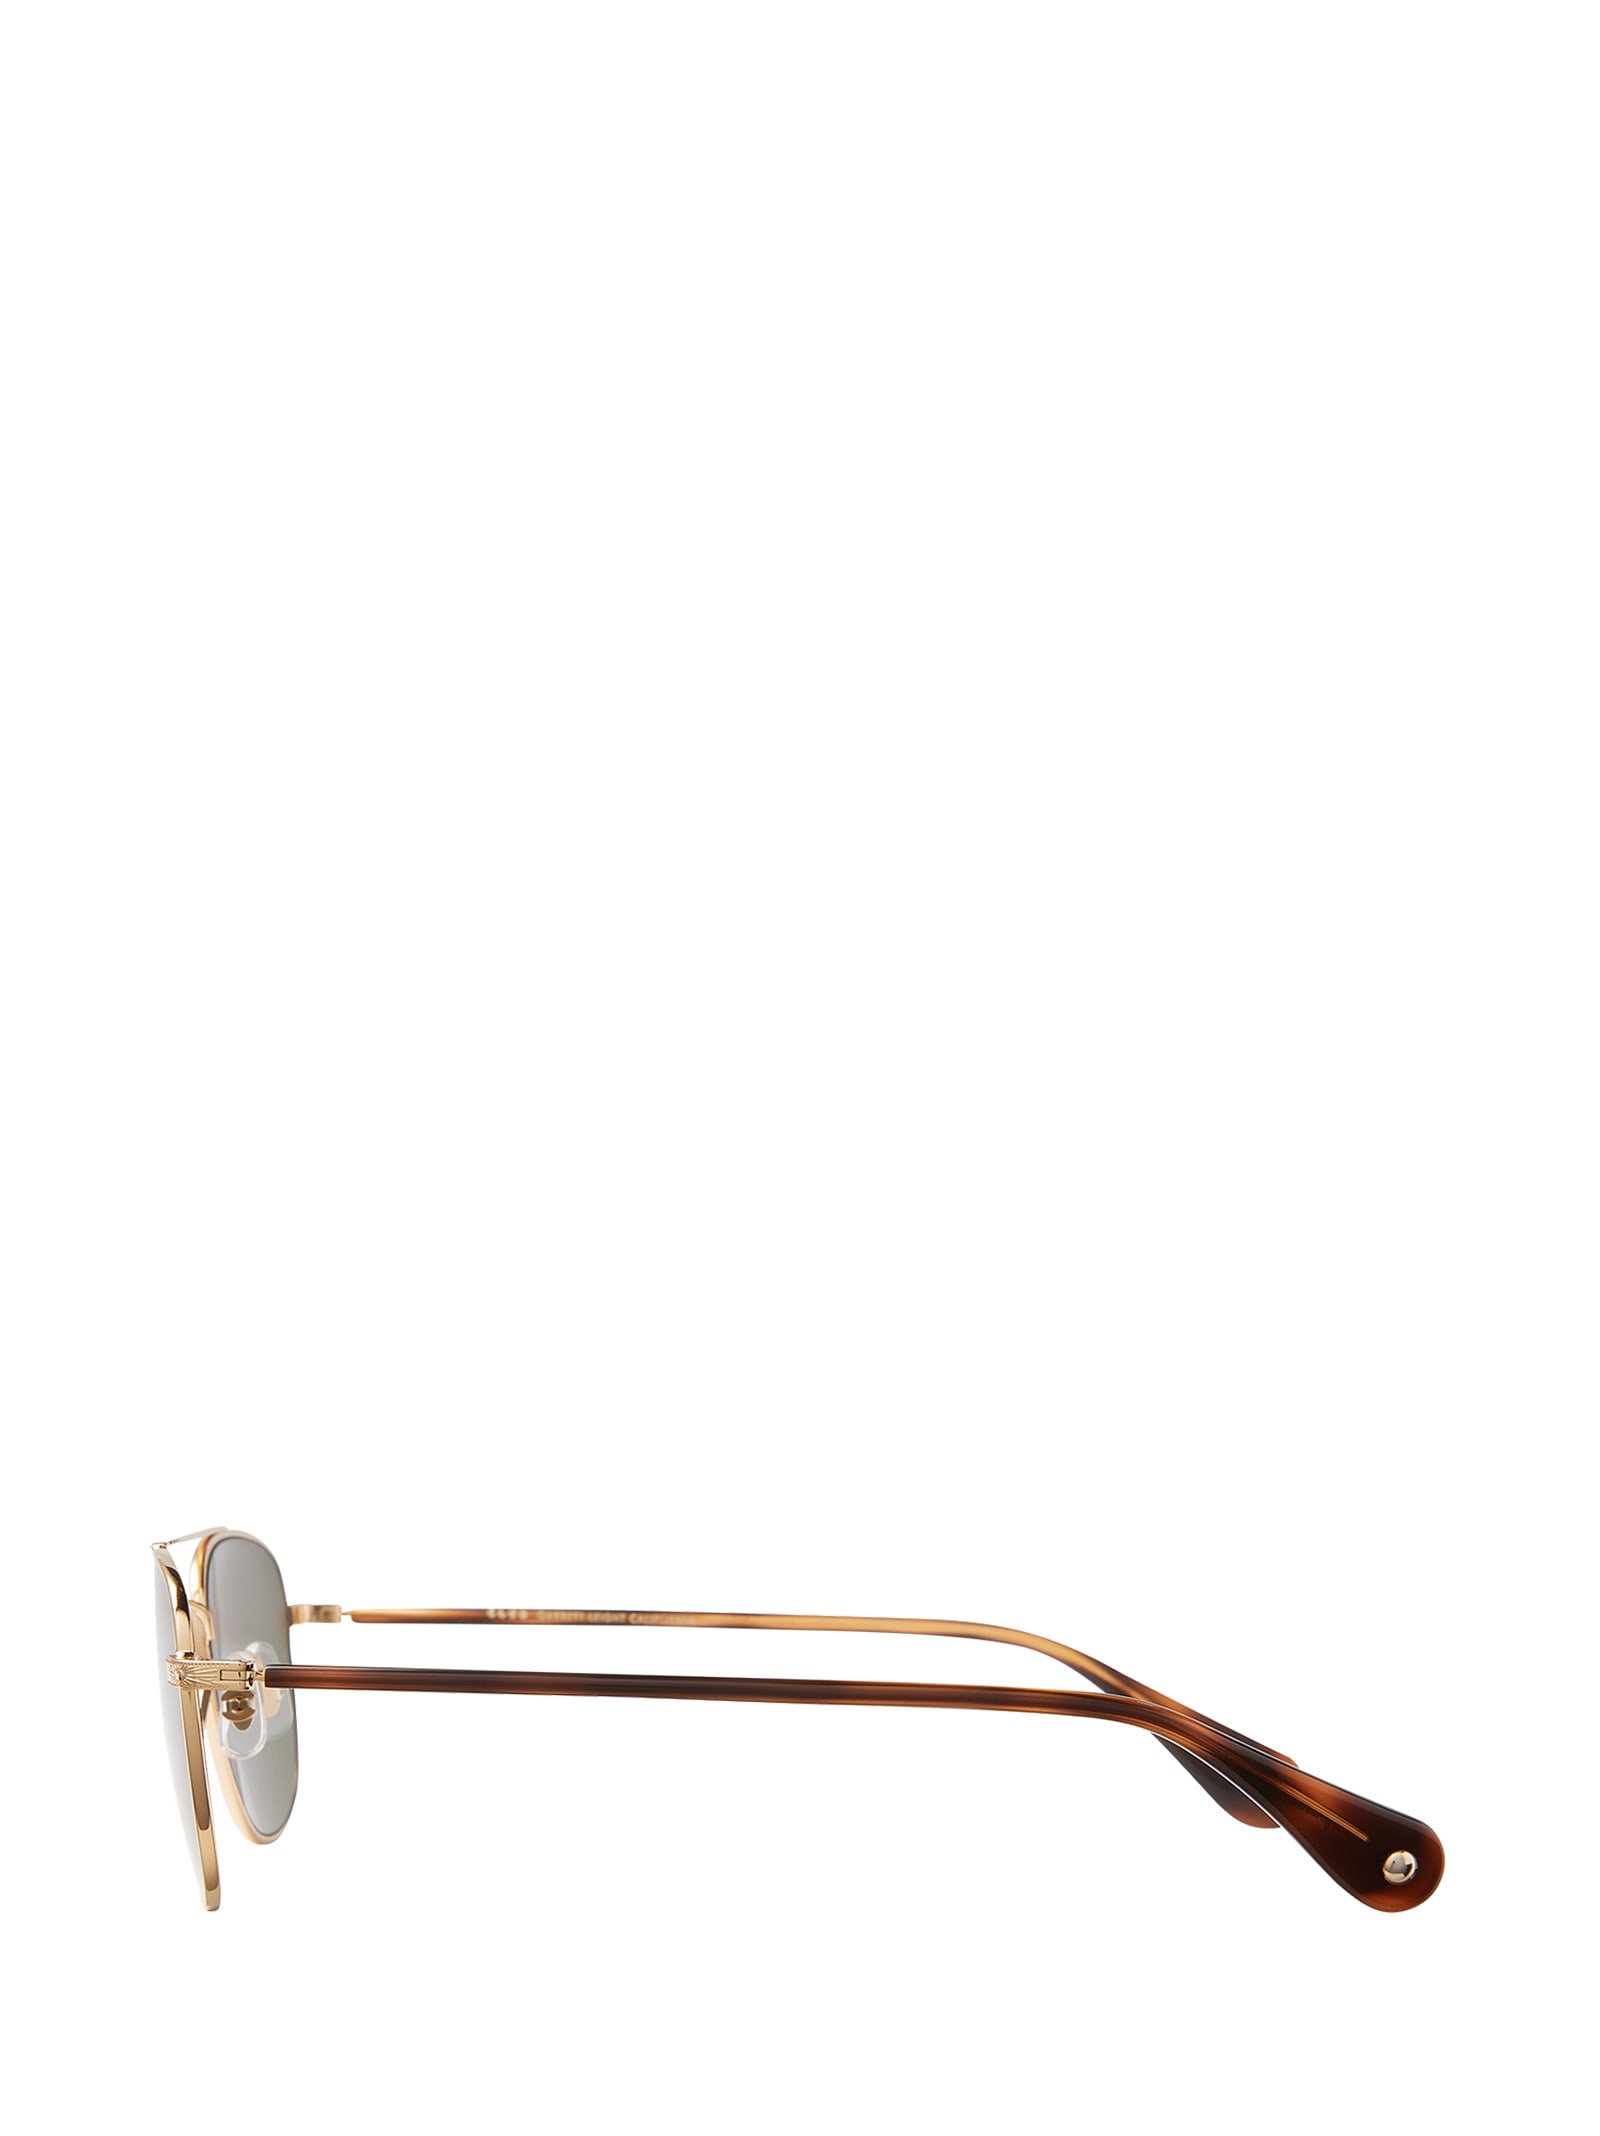 Shop Garrett Leight Clubhouse Ii Sun Gold-spotted Brown Shell Sunglasses